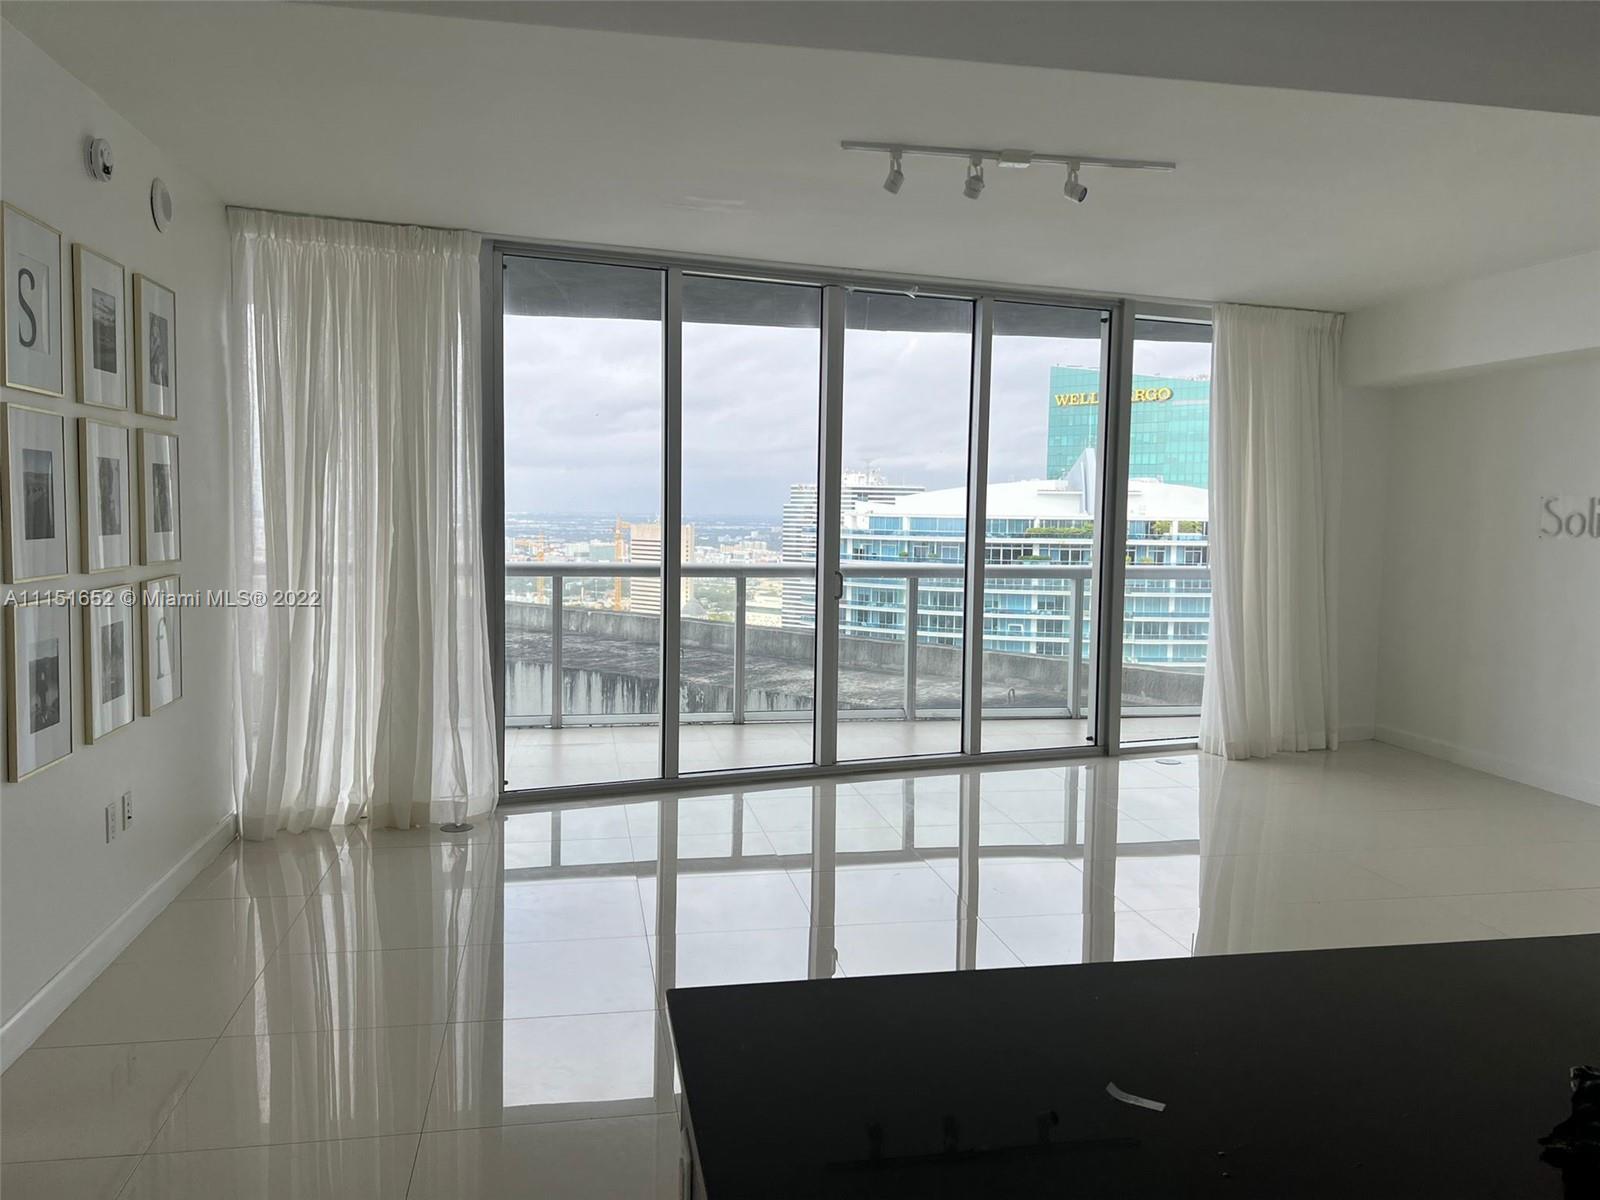 OWNER WILL ENJOY THE MIAMI LIFE FROM THIS SPACIOUS APARTMENT. UNIT FEATURES PORCELAIN FLOOR THROUGHO